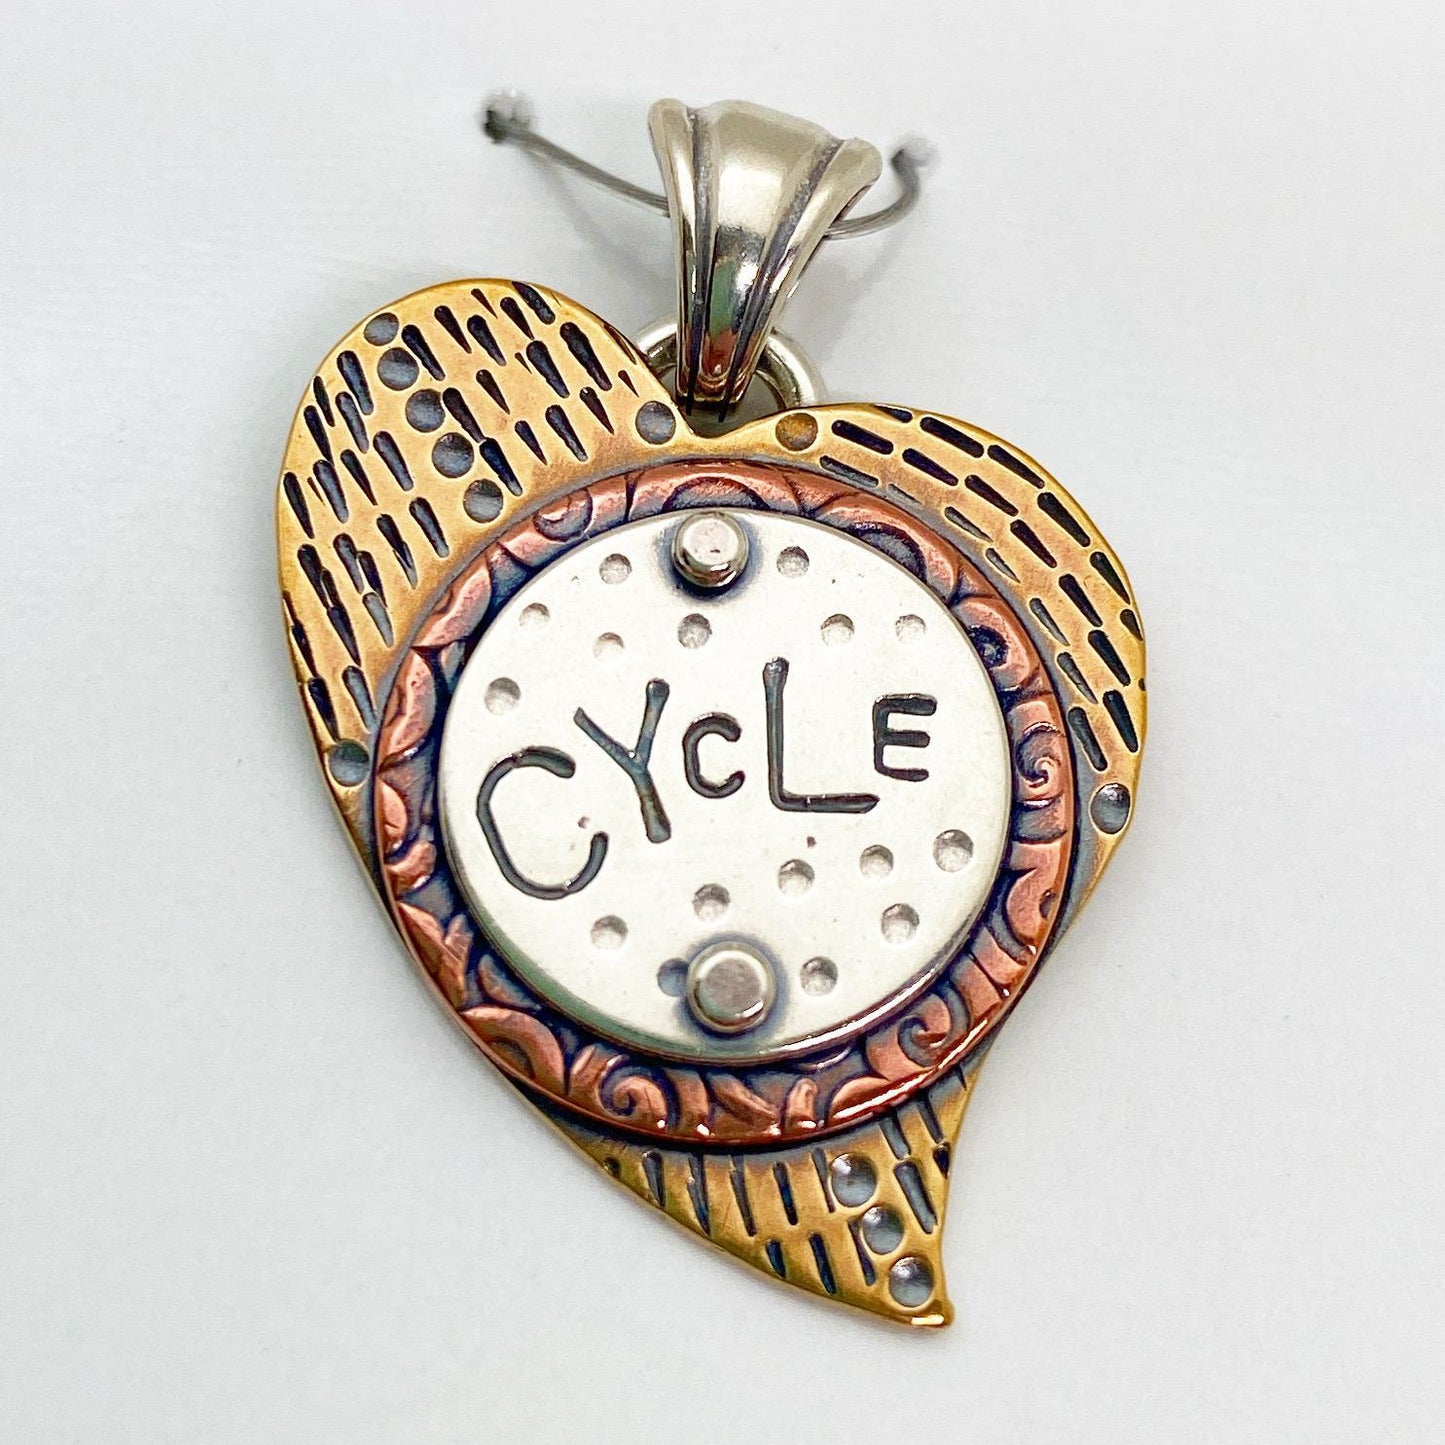 Pendant - Cycle - Small Heart